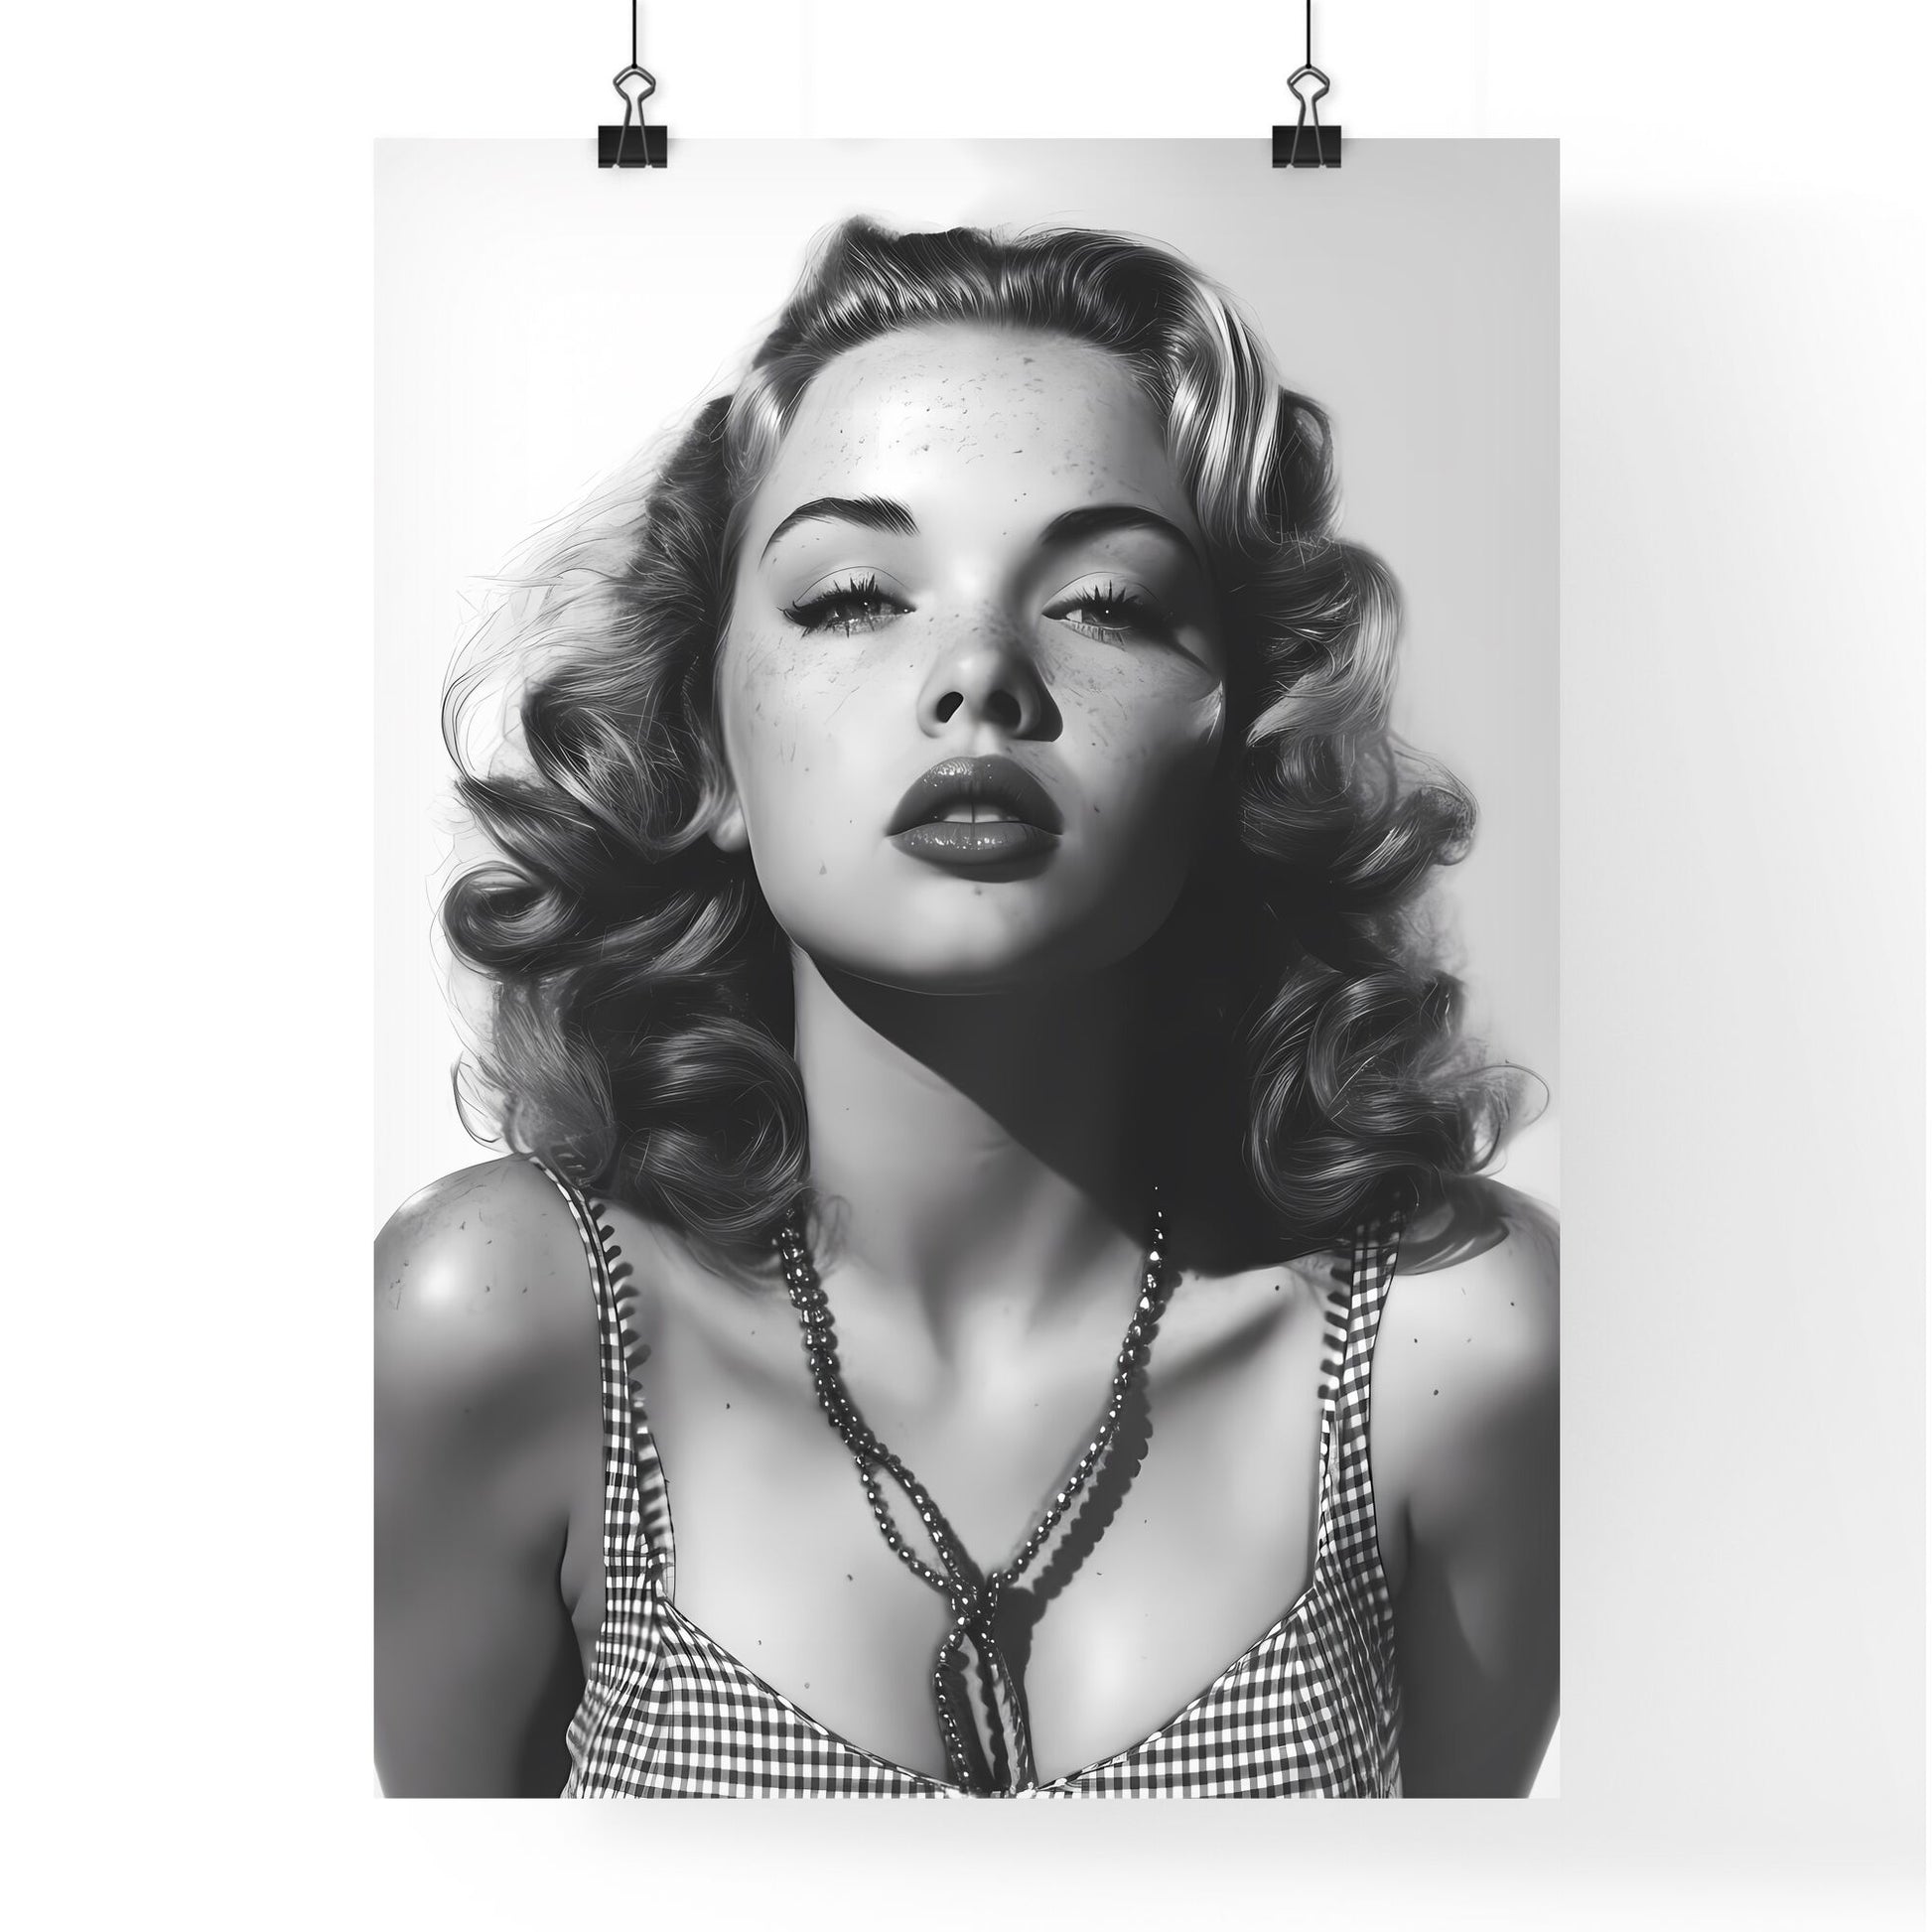 The vintage pin up girl - Art print of a woman with freckles and curly hair Default Title